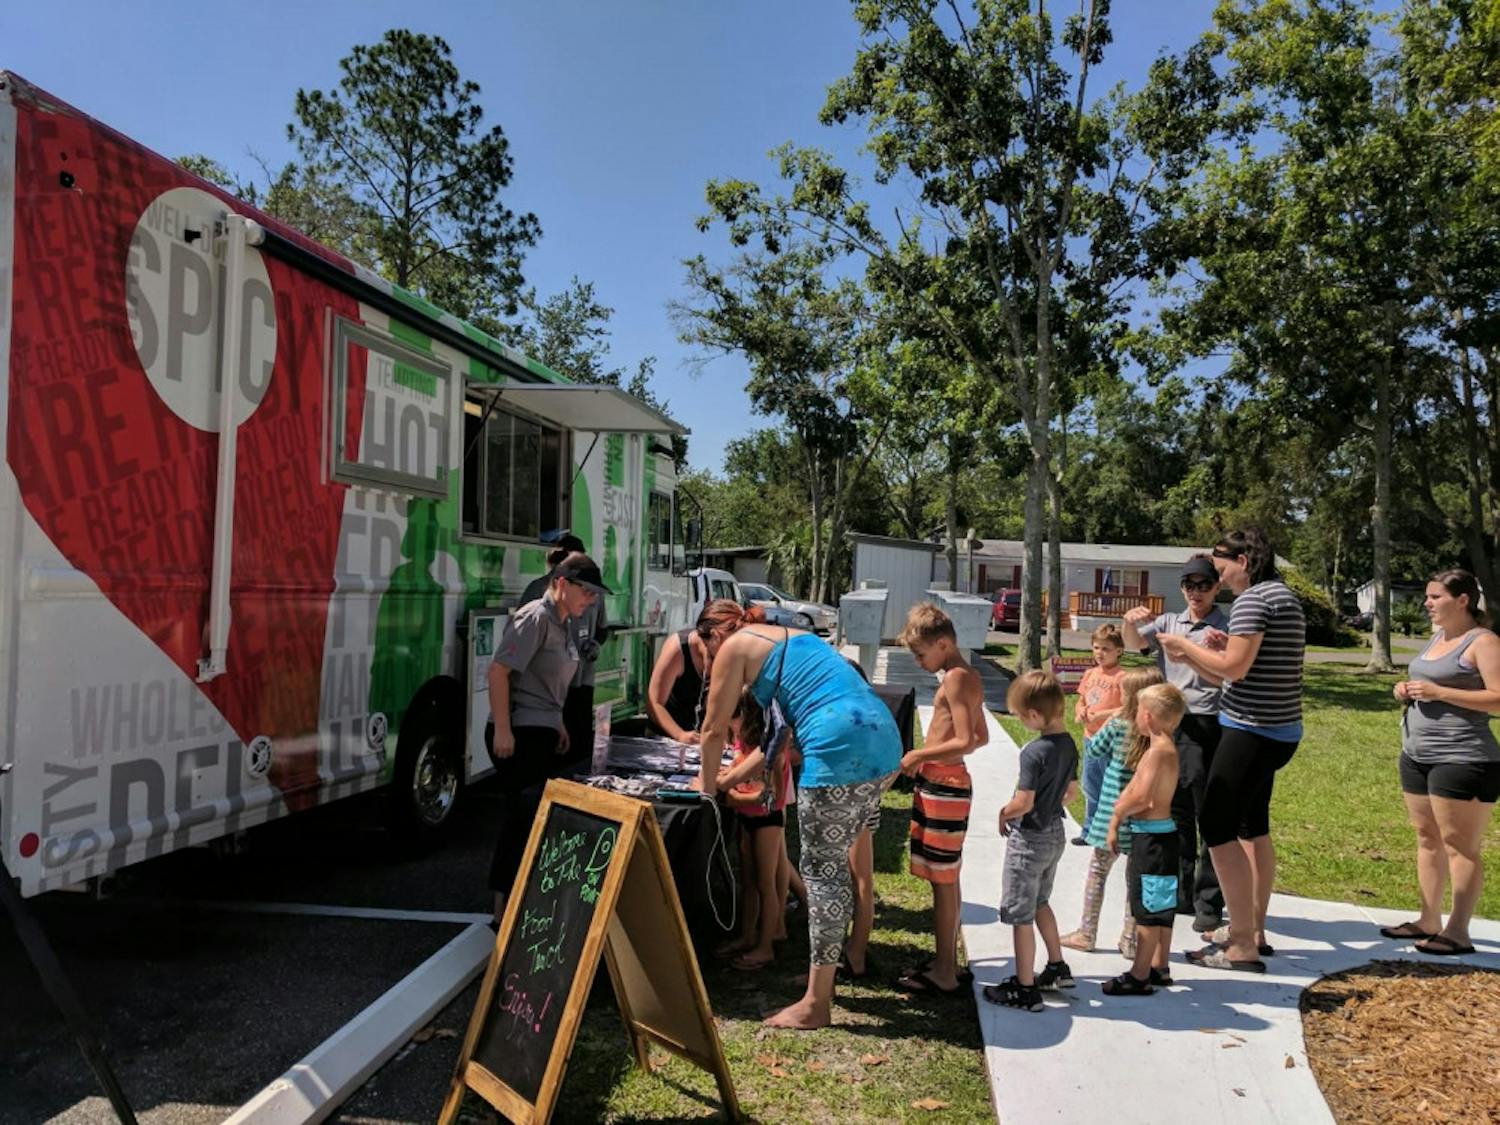 People line up in front of the Alachua County Public Schools On Point Food Truck in Gainesville for the Summer BreakSpot Program.